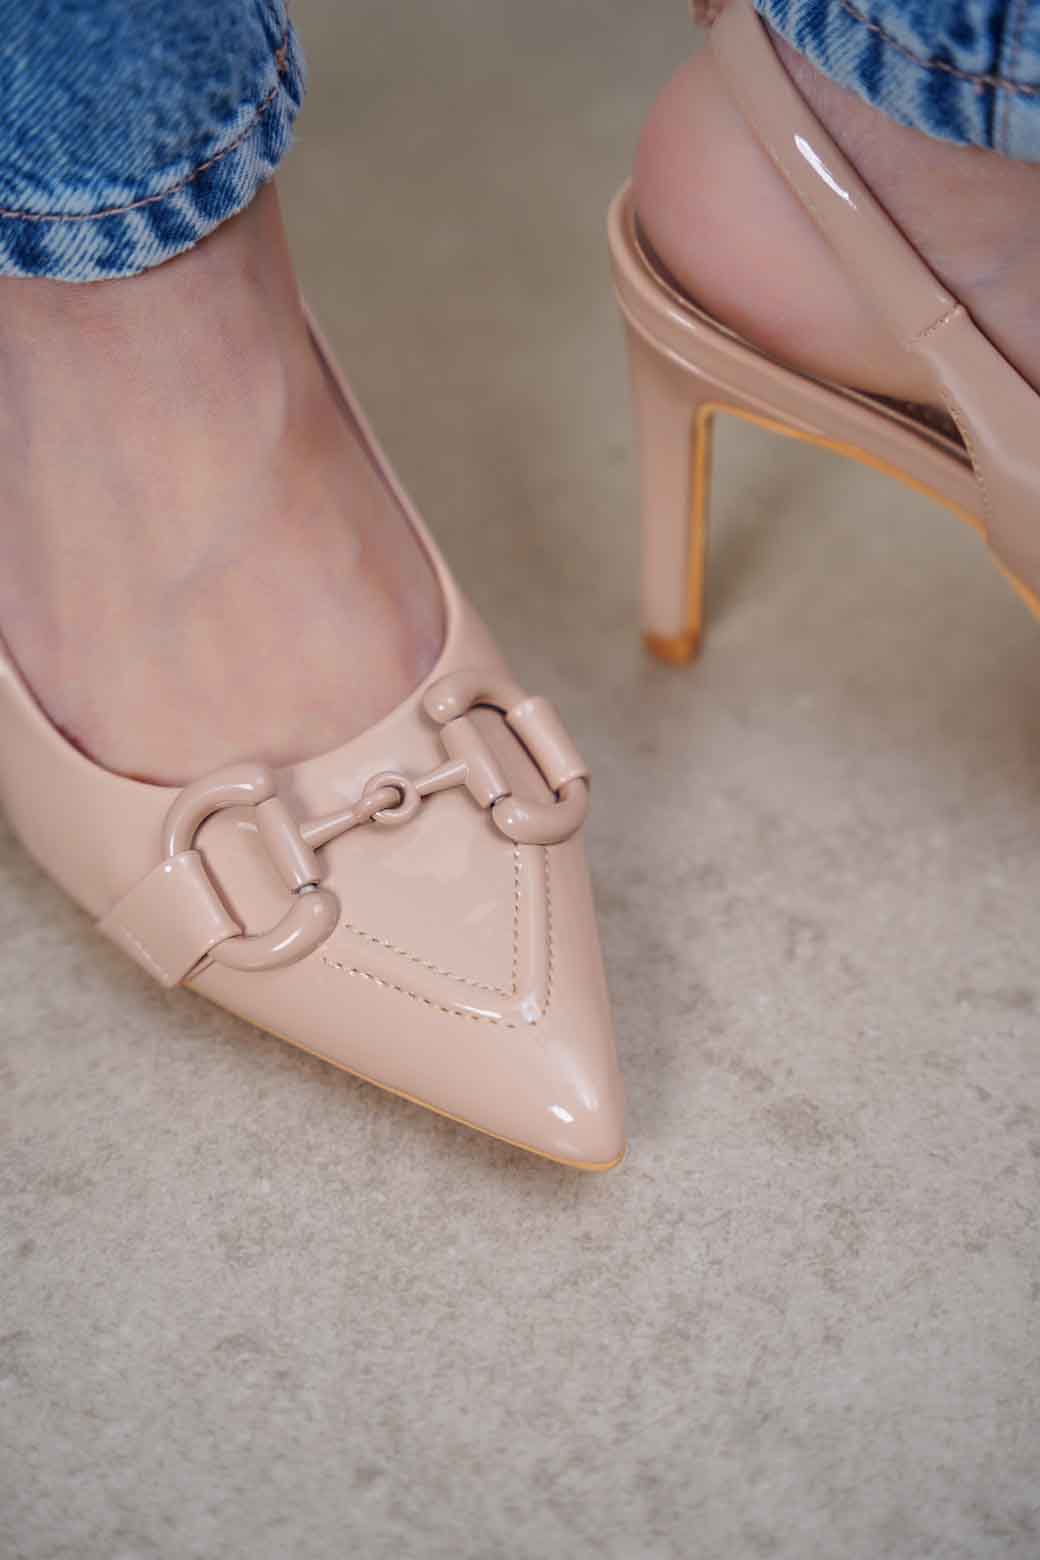 NUDE POINTED SLINGBACK